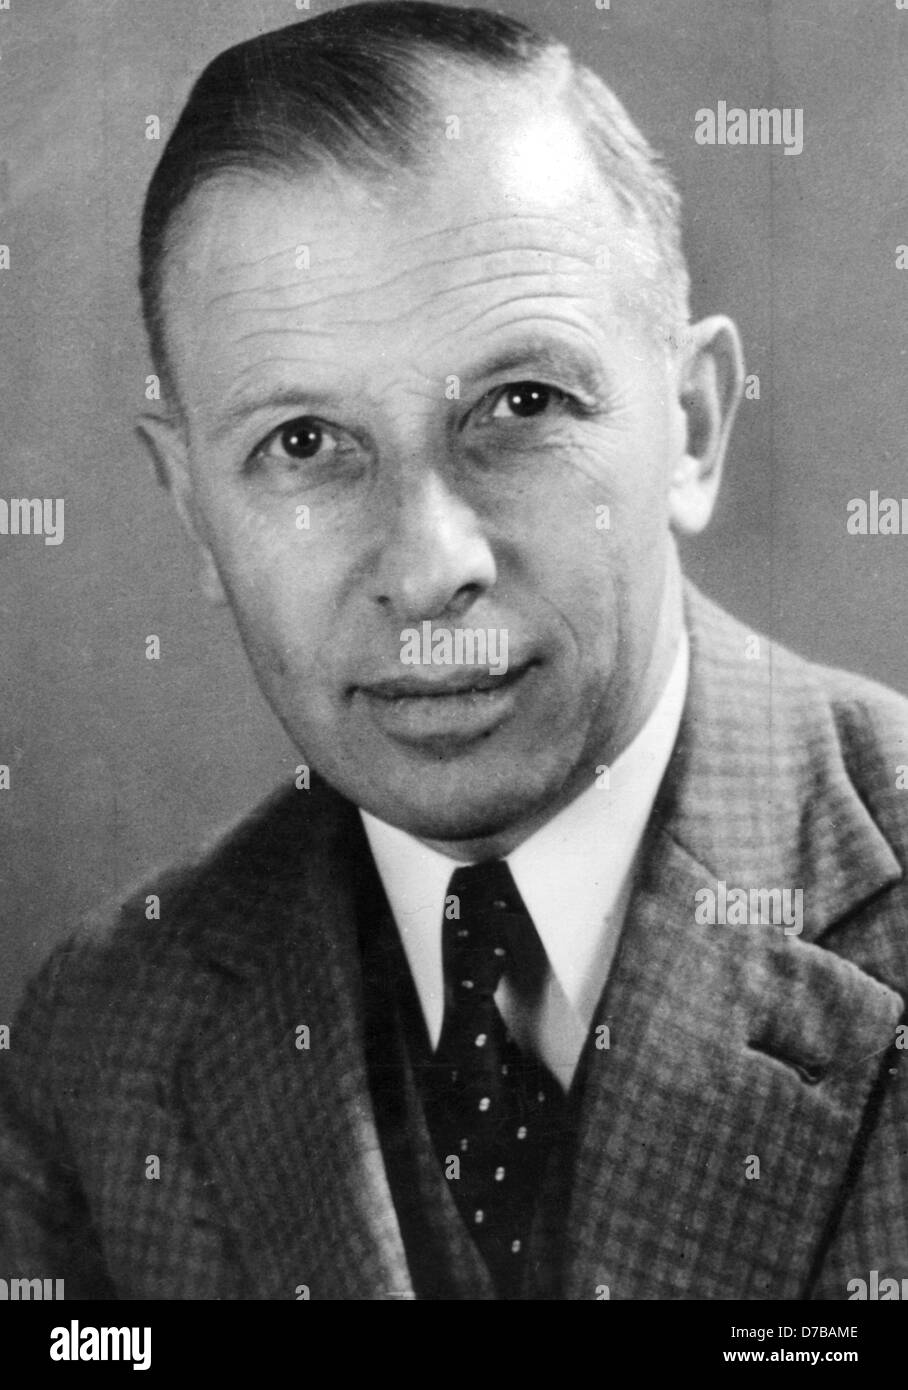 Adolf Heusinger in the year 1951. After having been on active service in the Third Reich and having been arrested after the attempted assassination of Hitler, Chancellor Konrad Adenauer charged him with setting up the Federal armed forces. He became Inspector General of the Bundeswehr in 195. Stock Photo